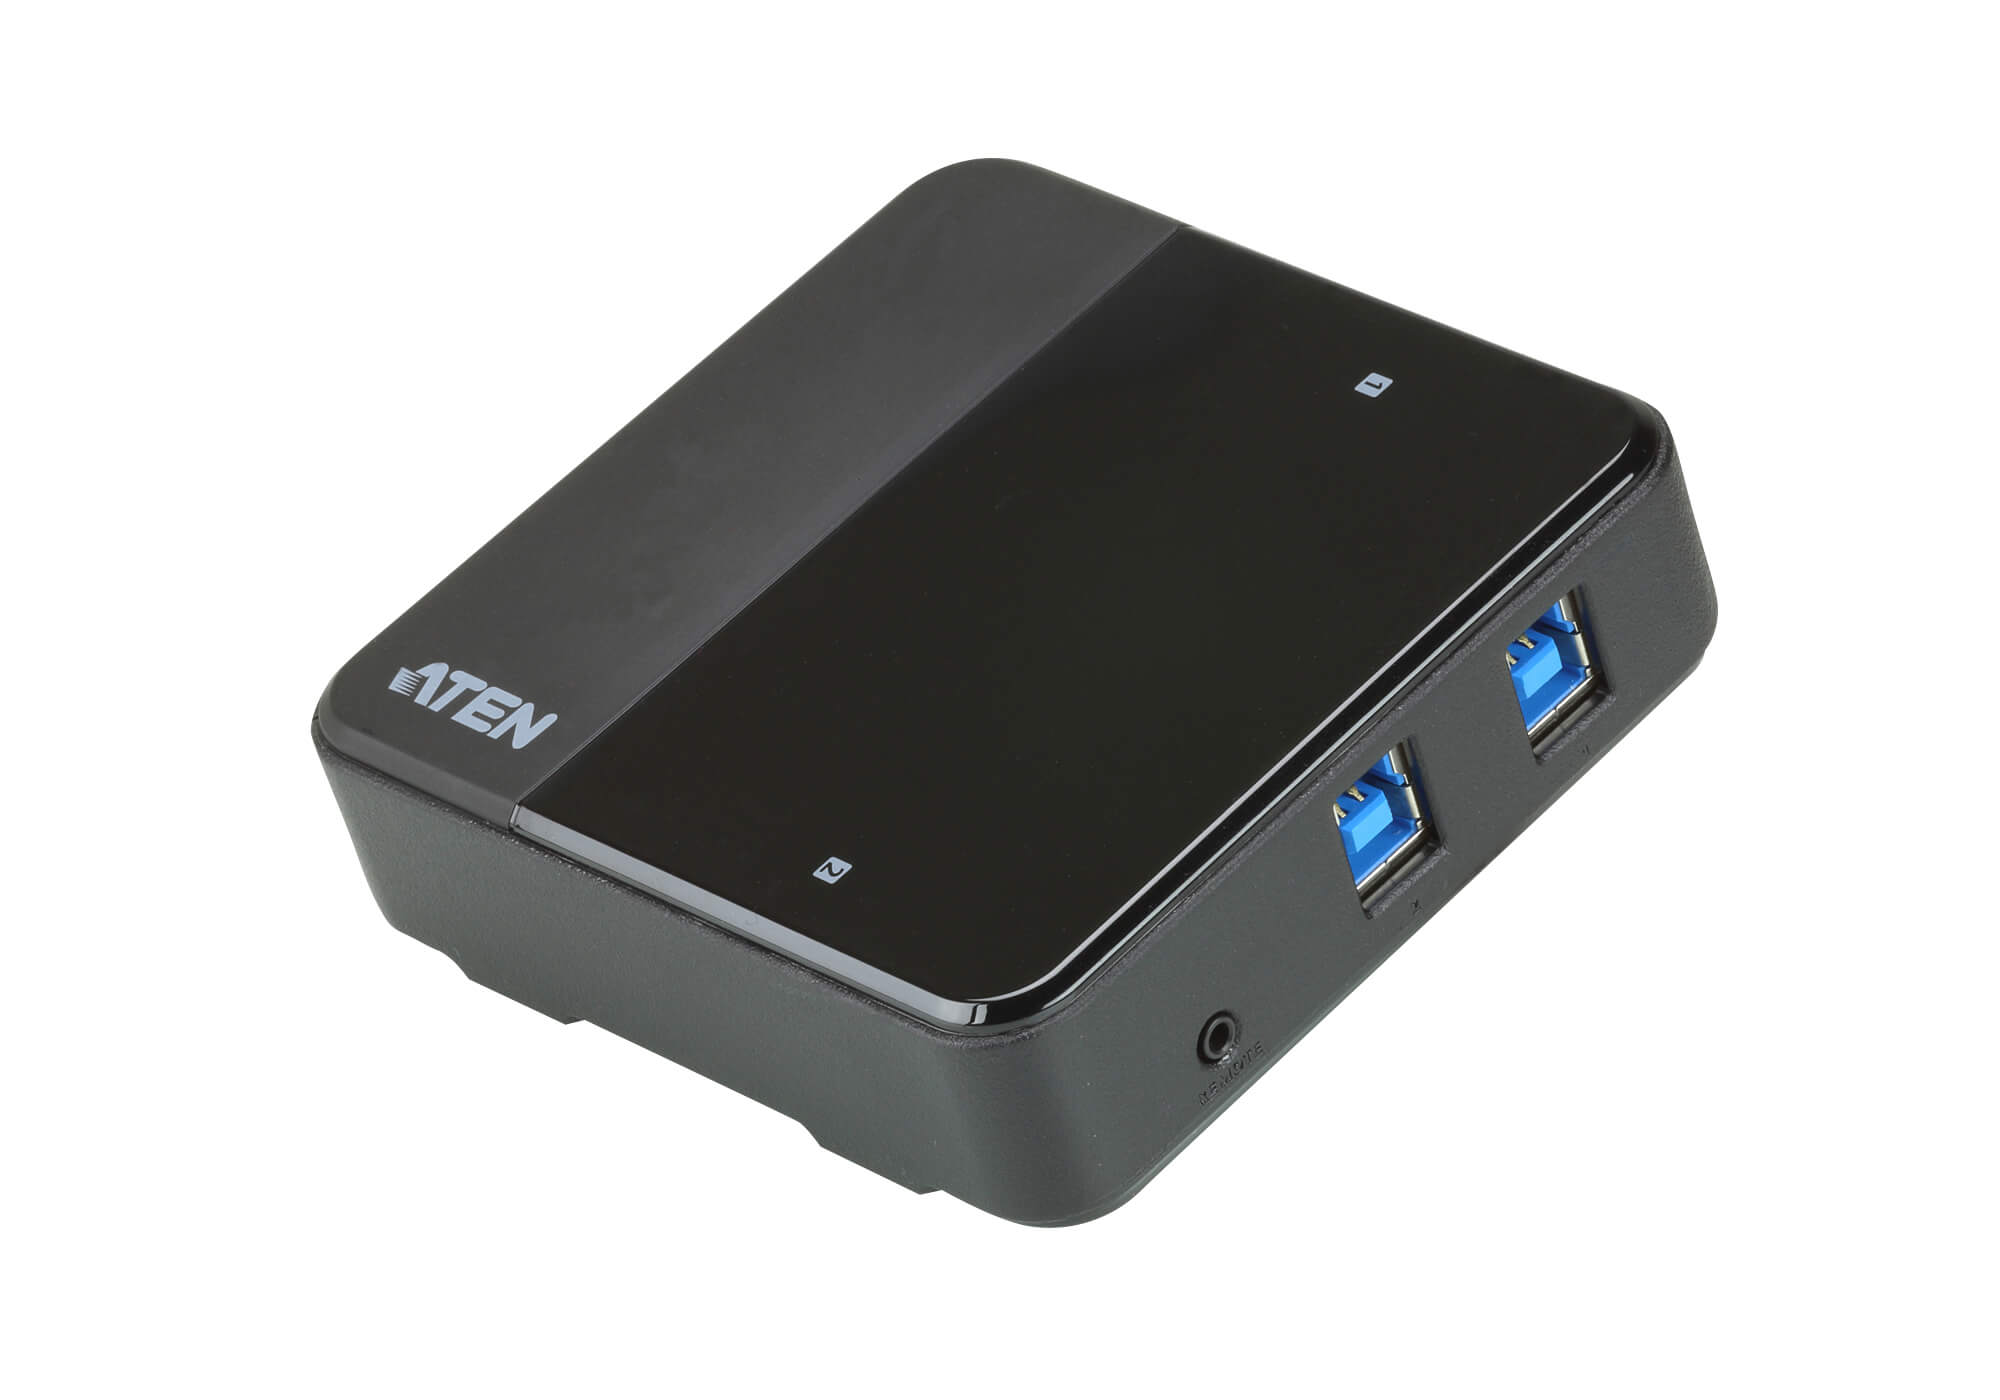 Aten, Peripheral, Switch, 2x4, USB, 3.1, Gen1, 2x, PC, 4x, USB, 3.1, Gen1, Ports, Remote, Port, Selector, Plug, and, Play, 